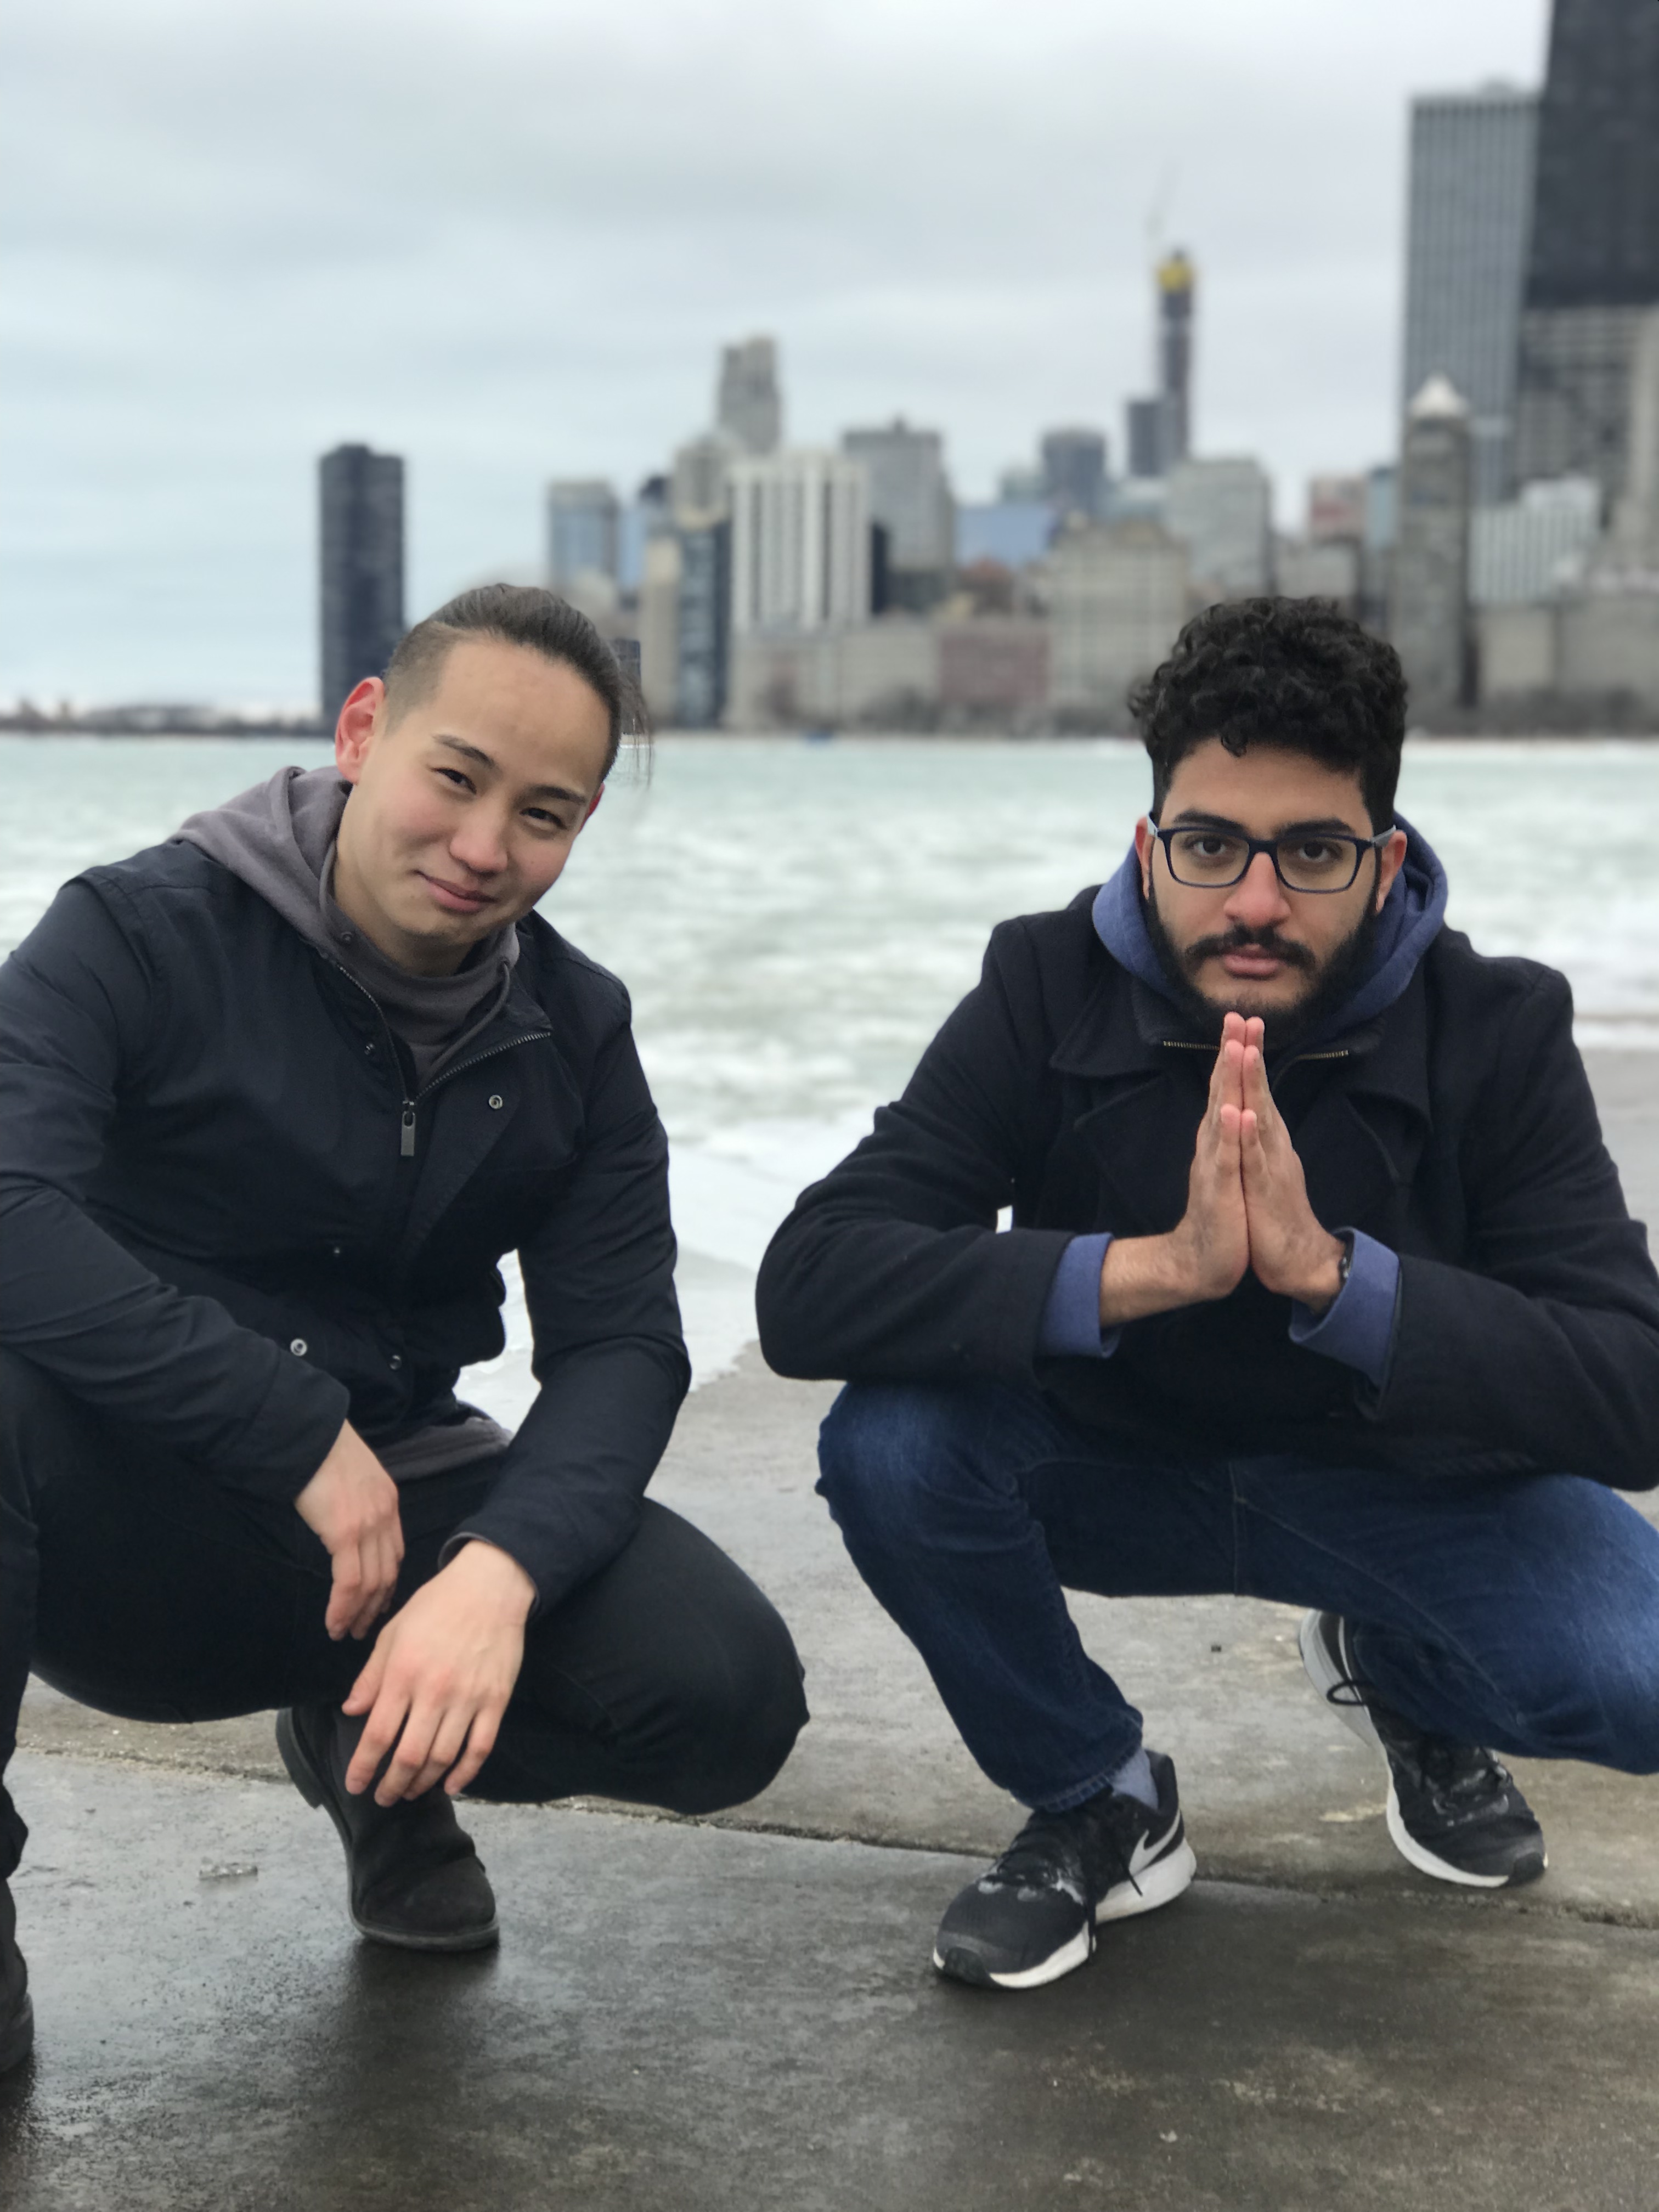 Me kneeling and looking at the camera with a friend in Chicago, February 2019